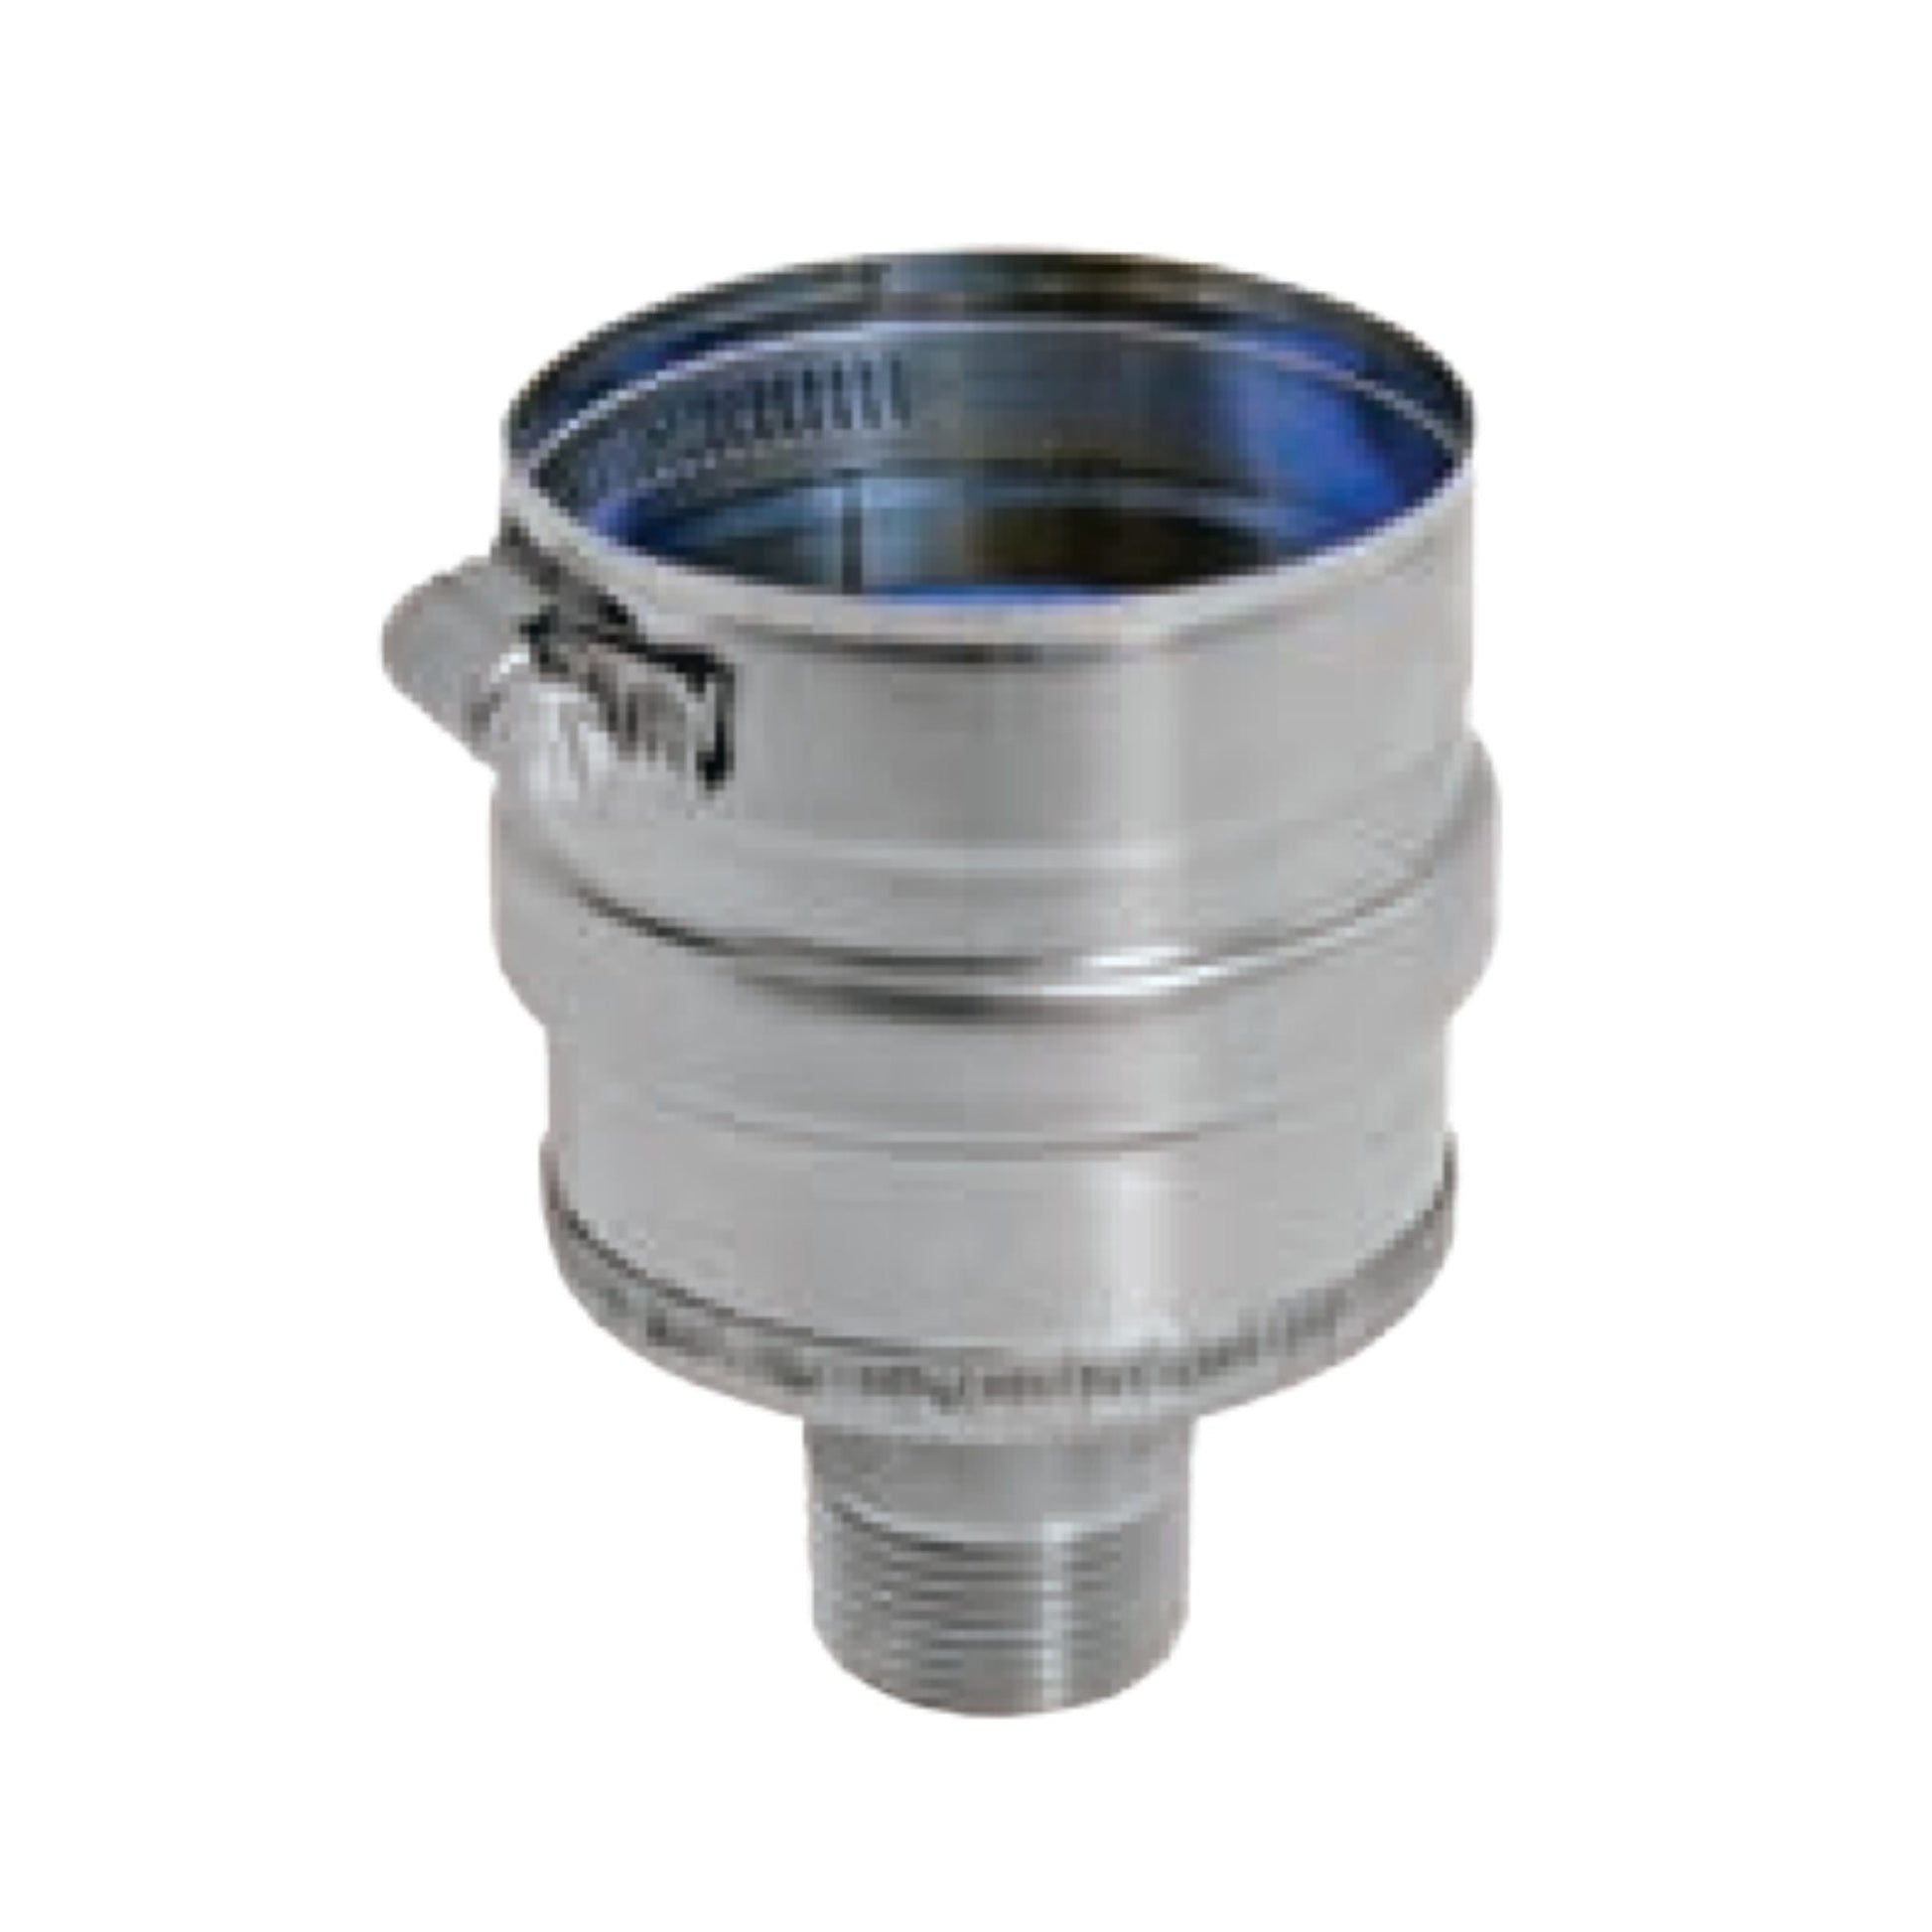 DuraVent FasNSeal 4" 316L Stainless Steel IPS Drain Fitting